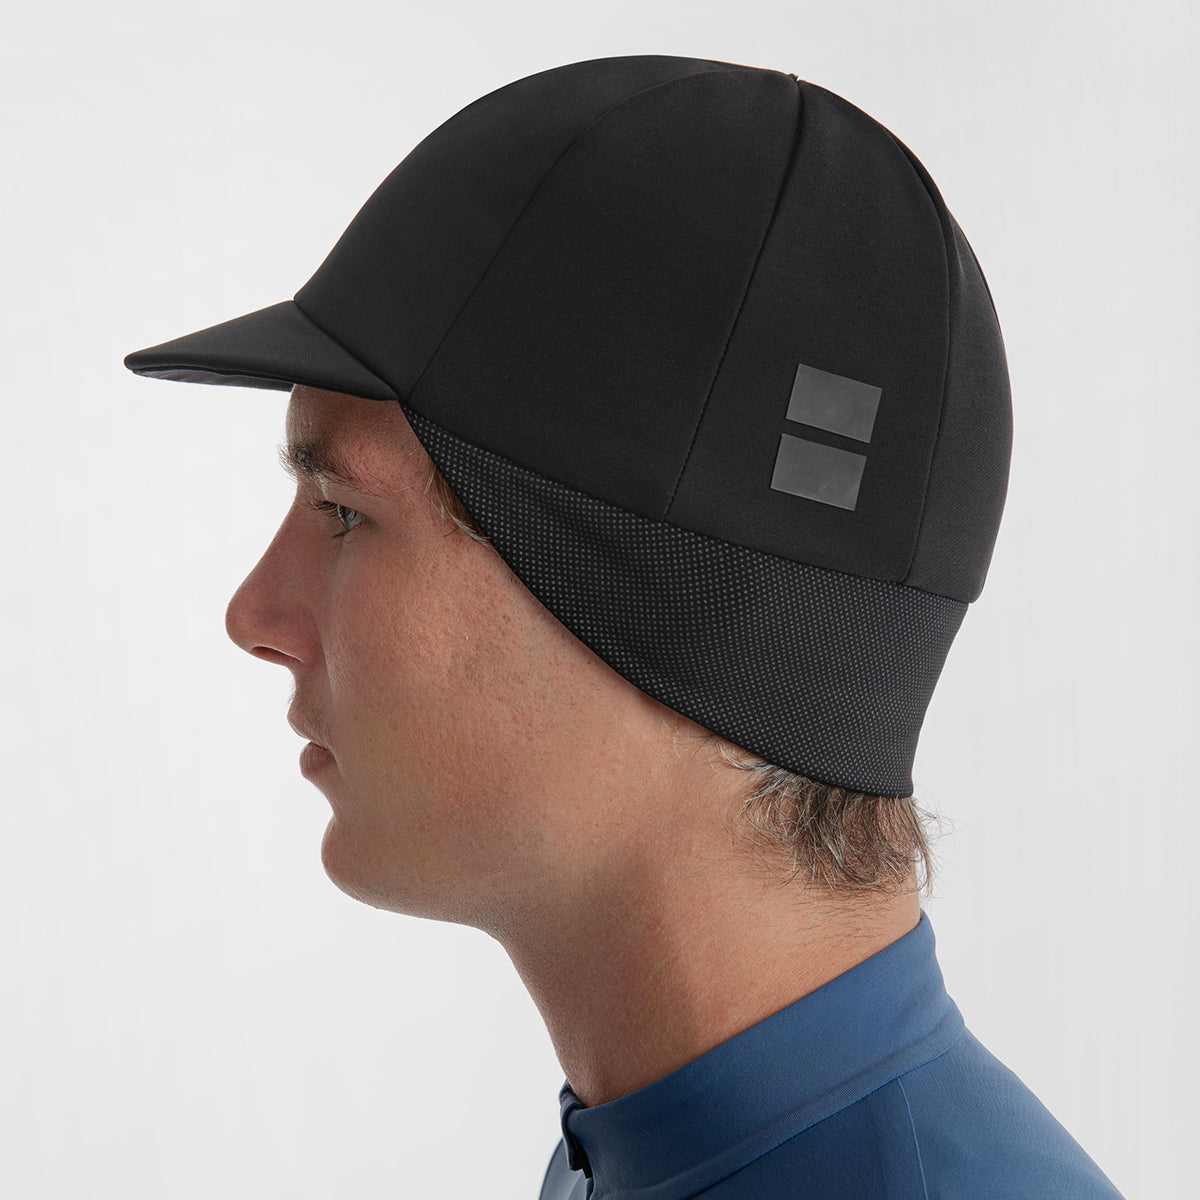 Pro Reflective Windproof Thermal Cap - Black